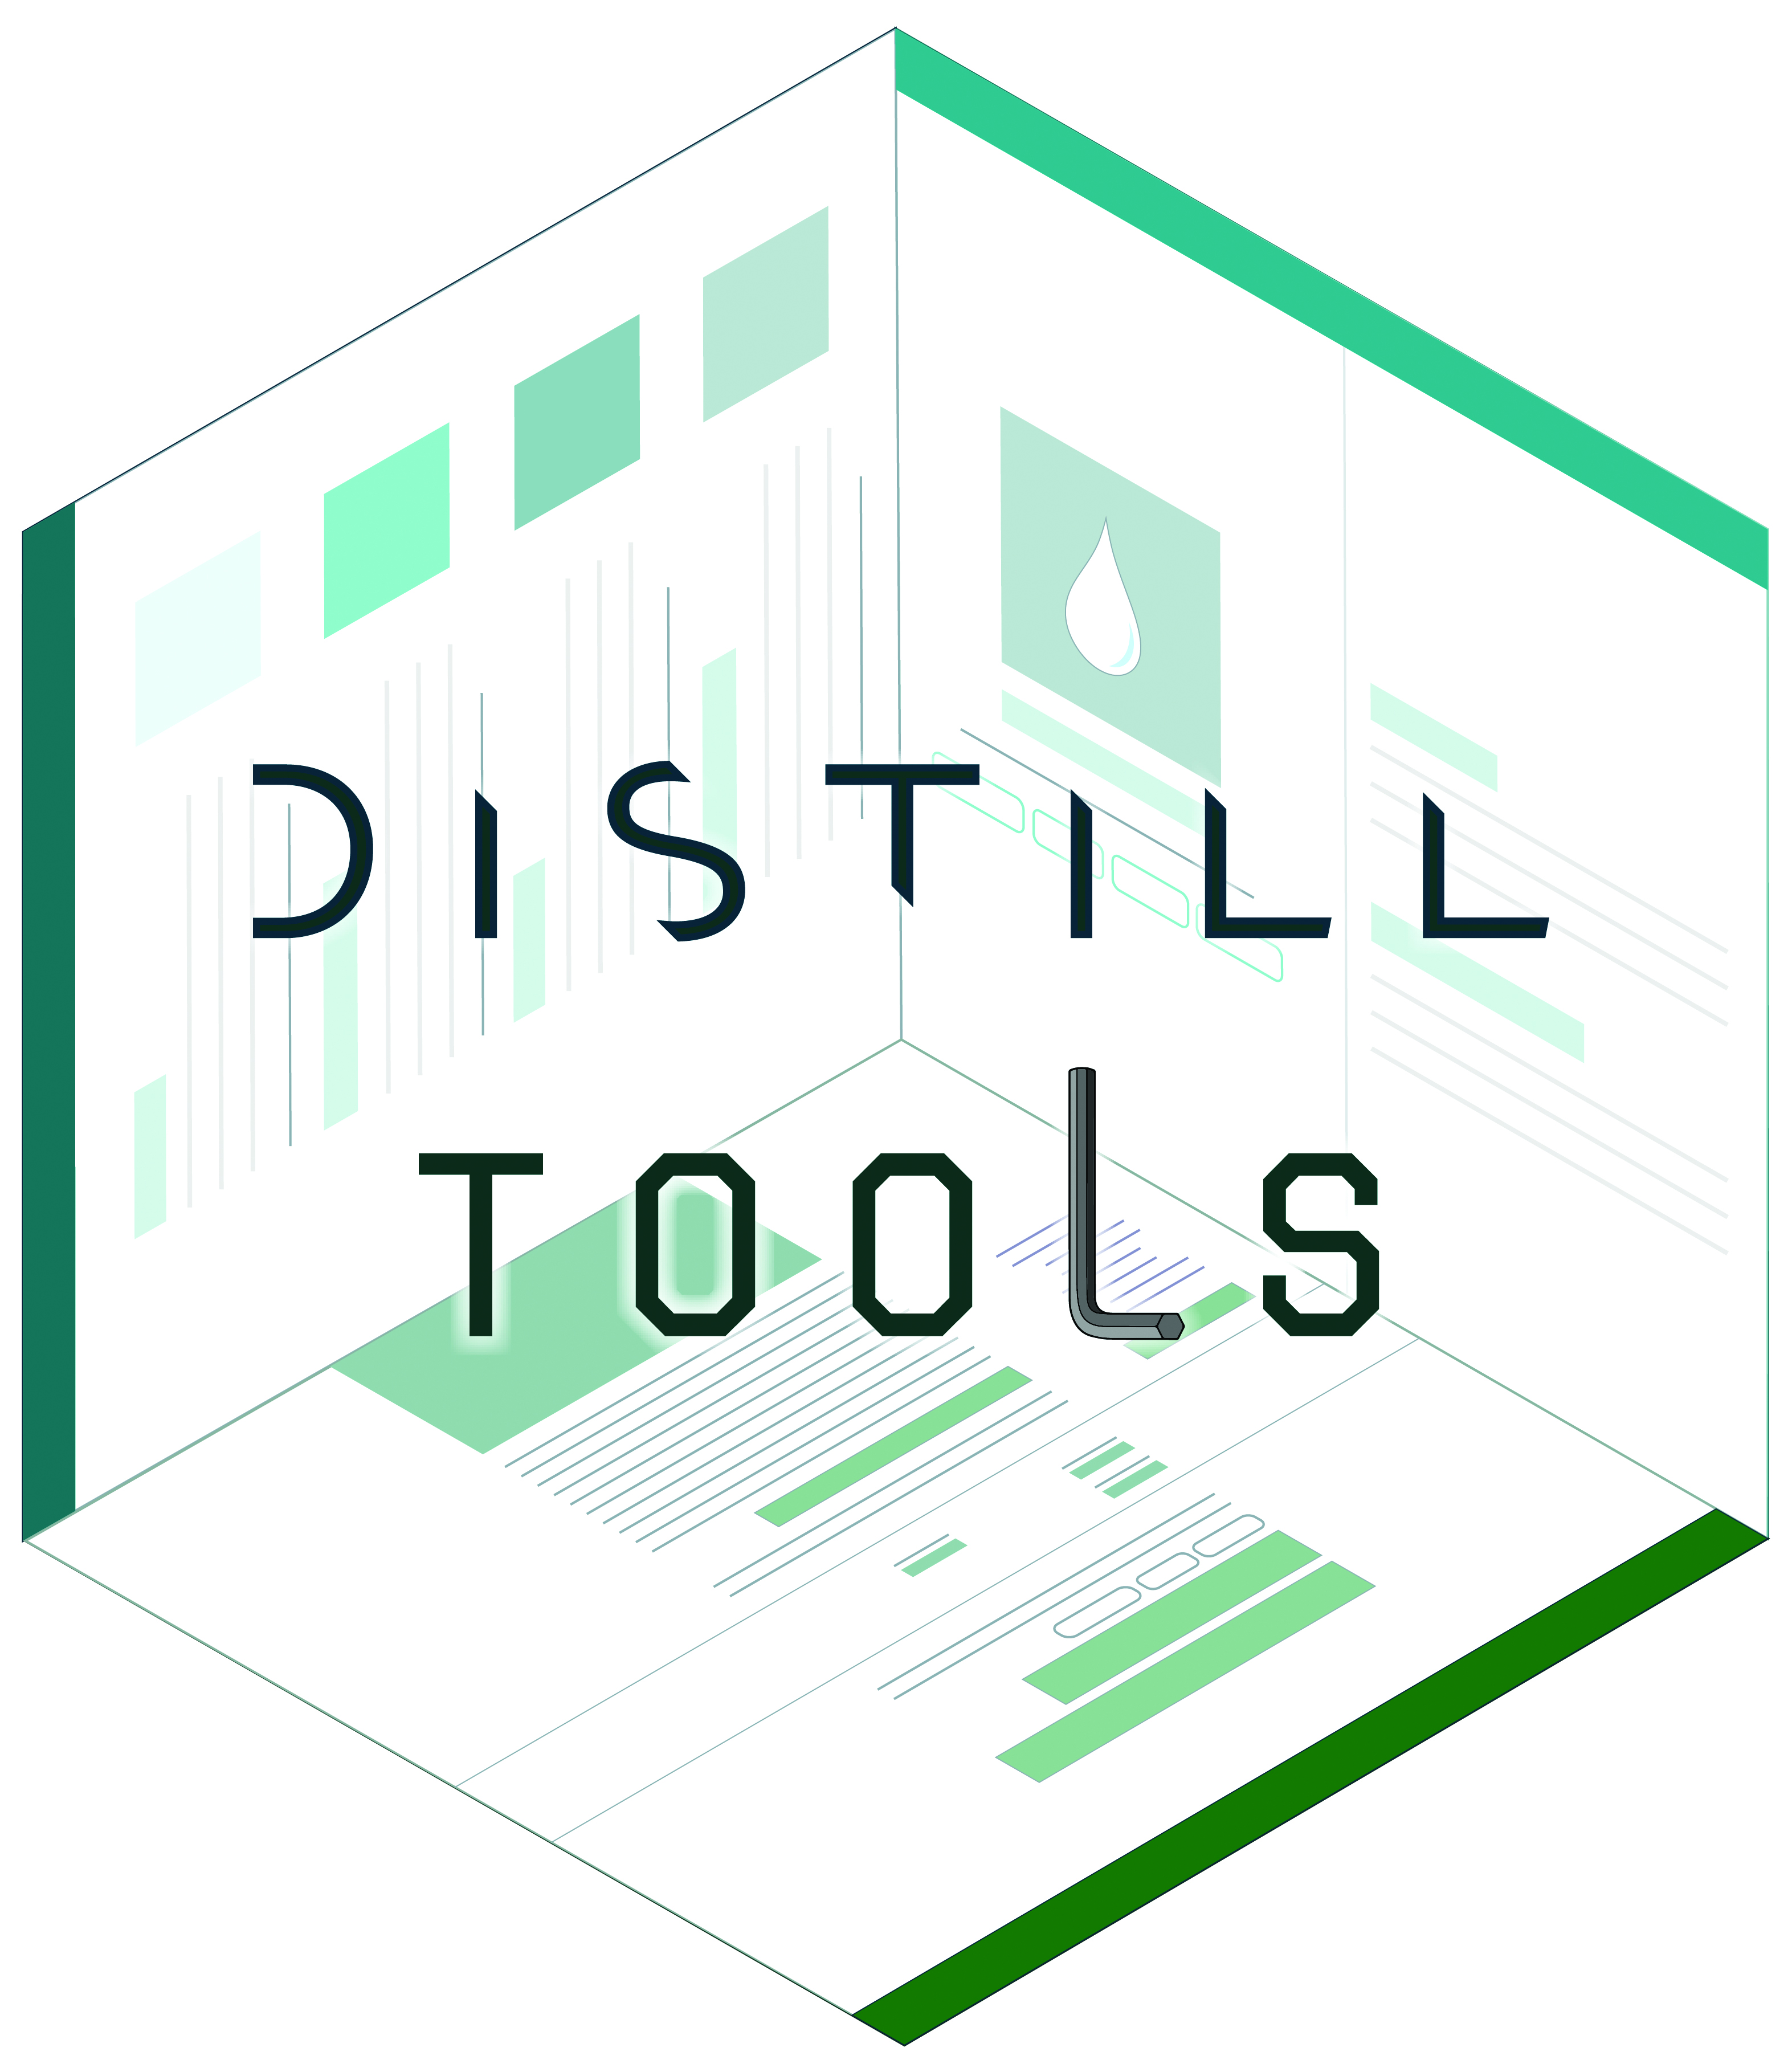 A hexagon that looks 3D, lines and squares with different shades of teal. The text “distill tools” front and center.